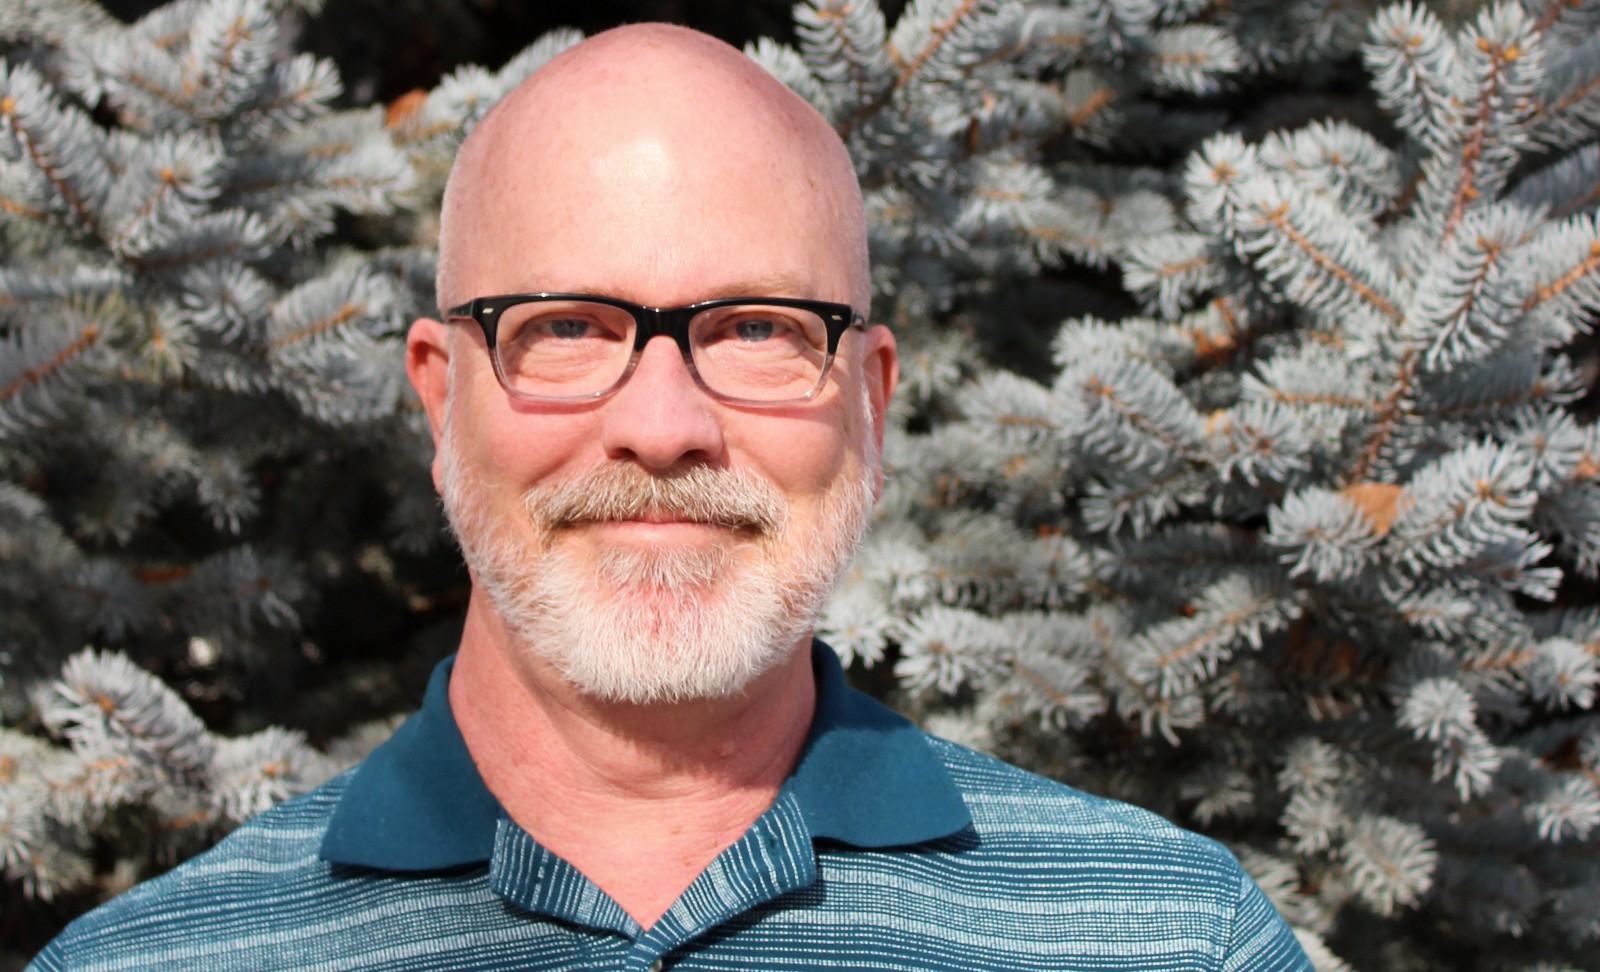 Greg Wilson, College of Western Idaho's Faculty of Distinction for January 2021